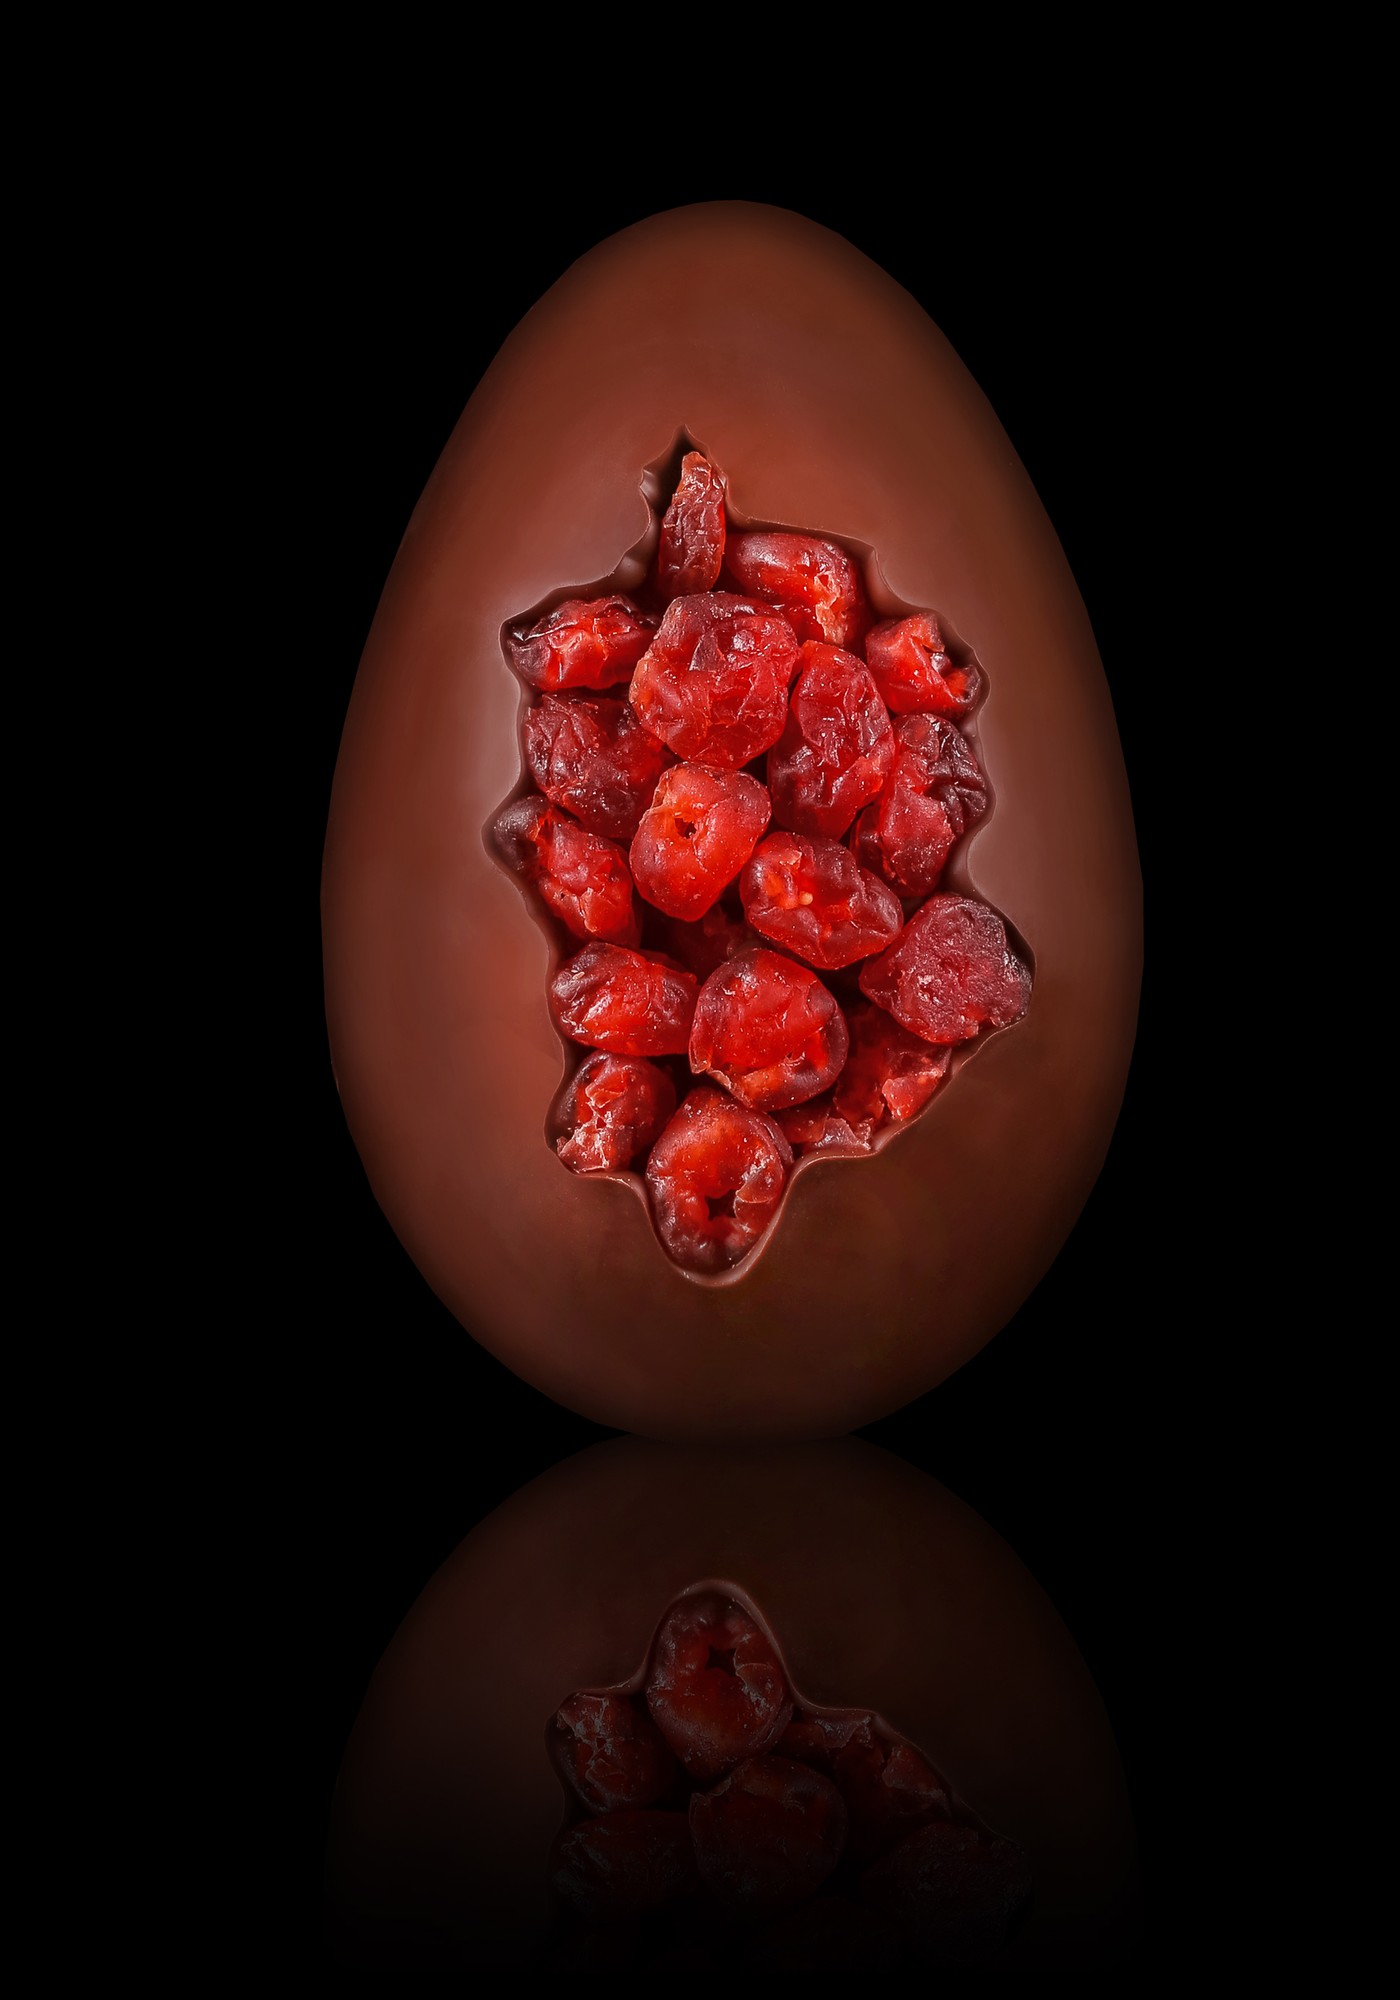 Chocolate egg with cherry